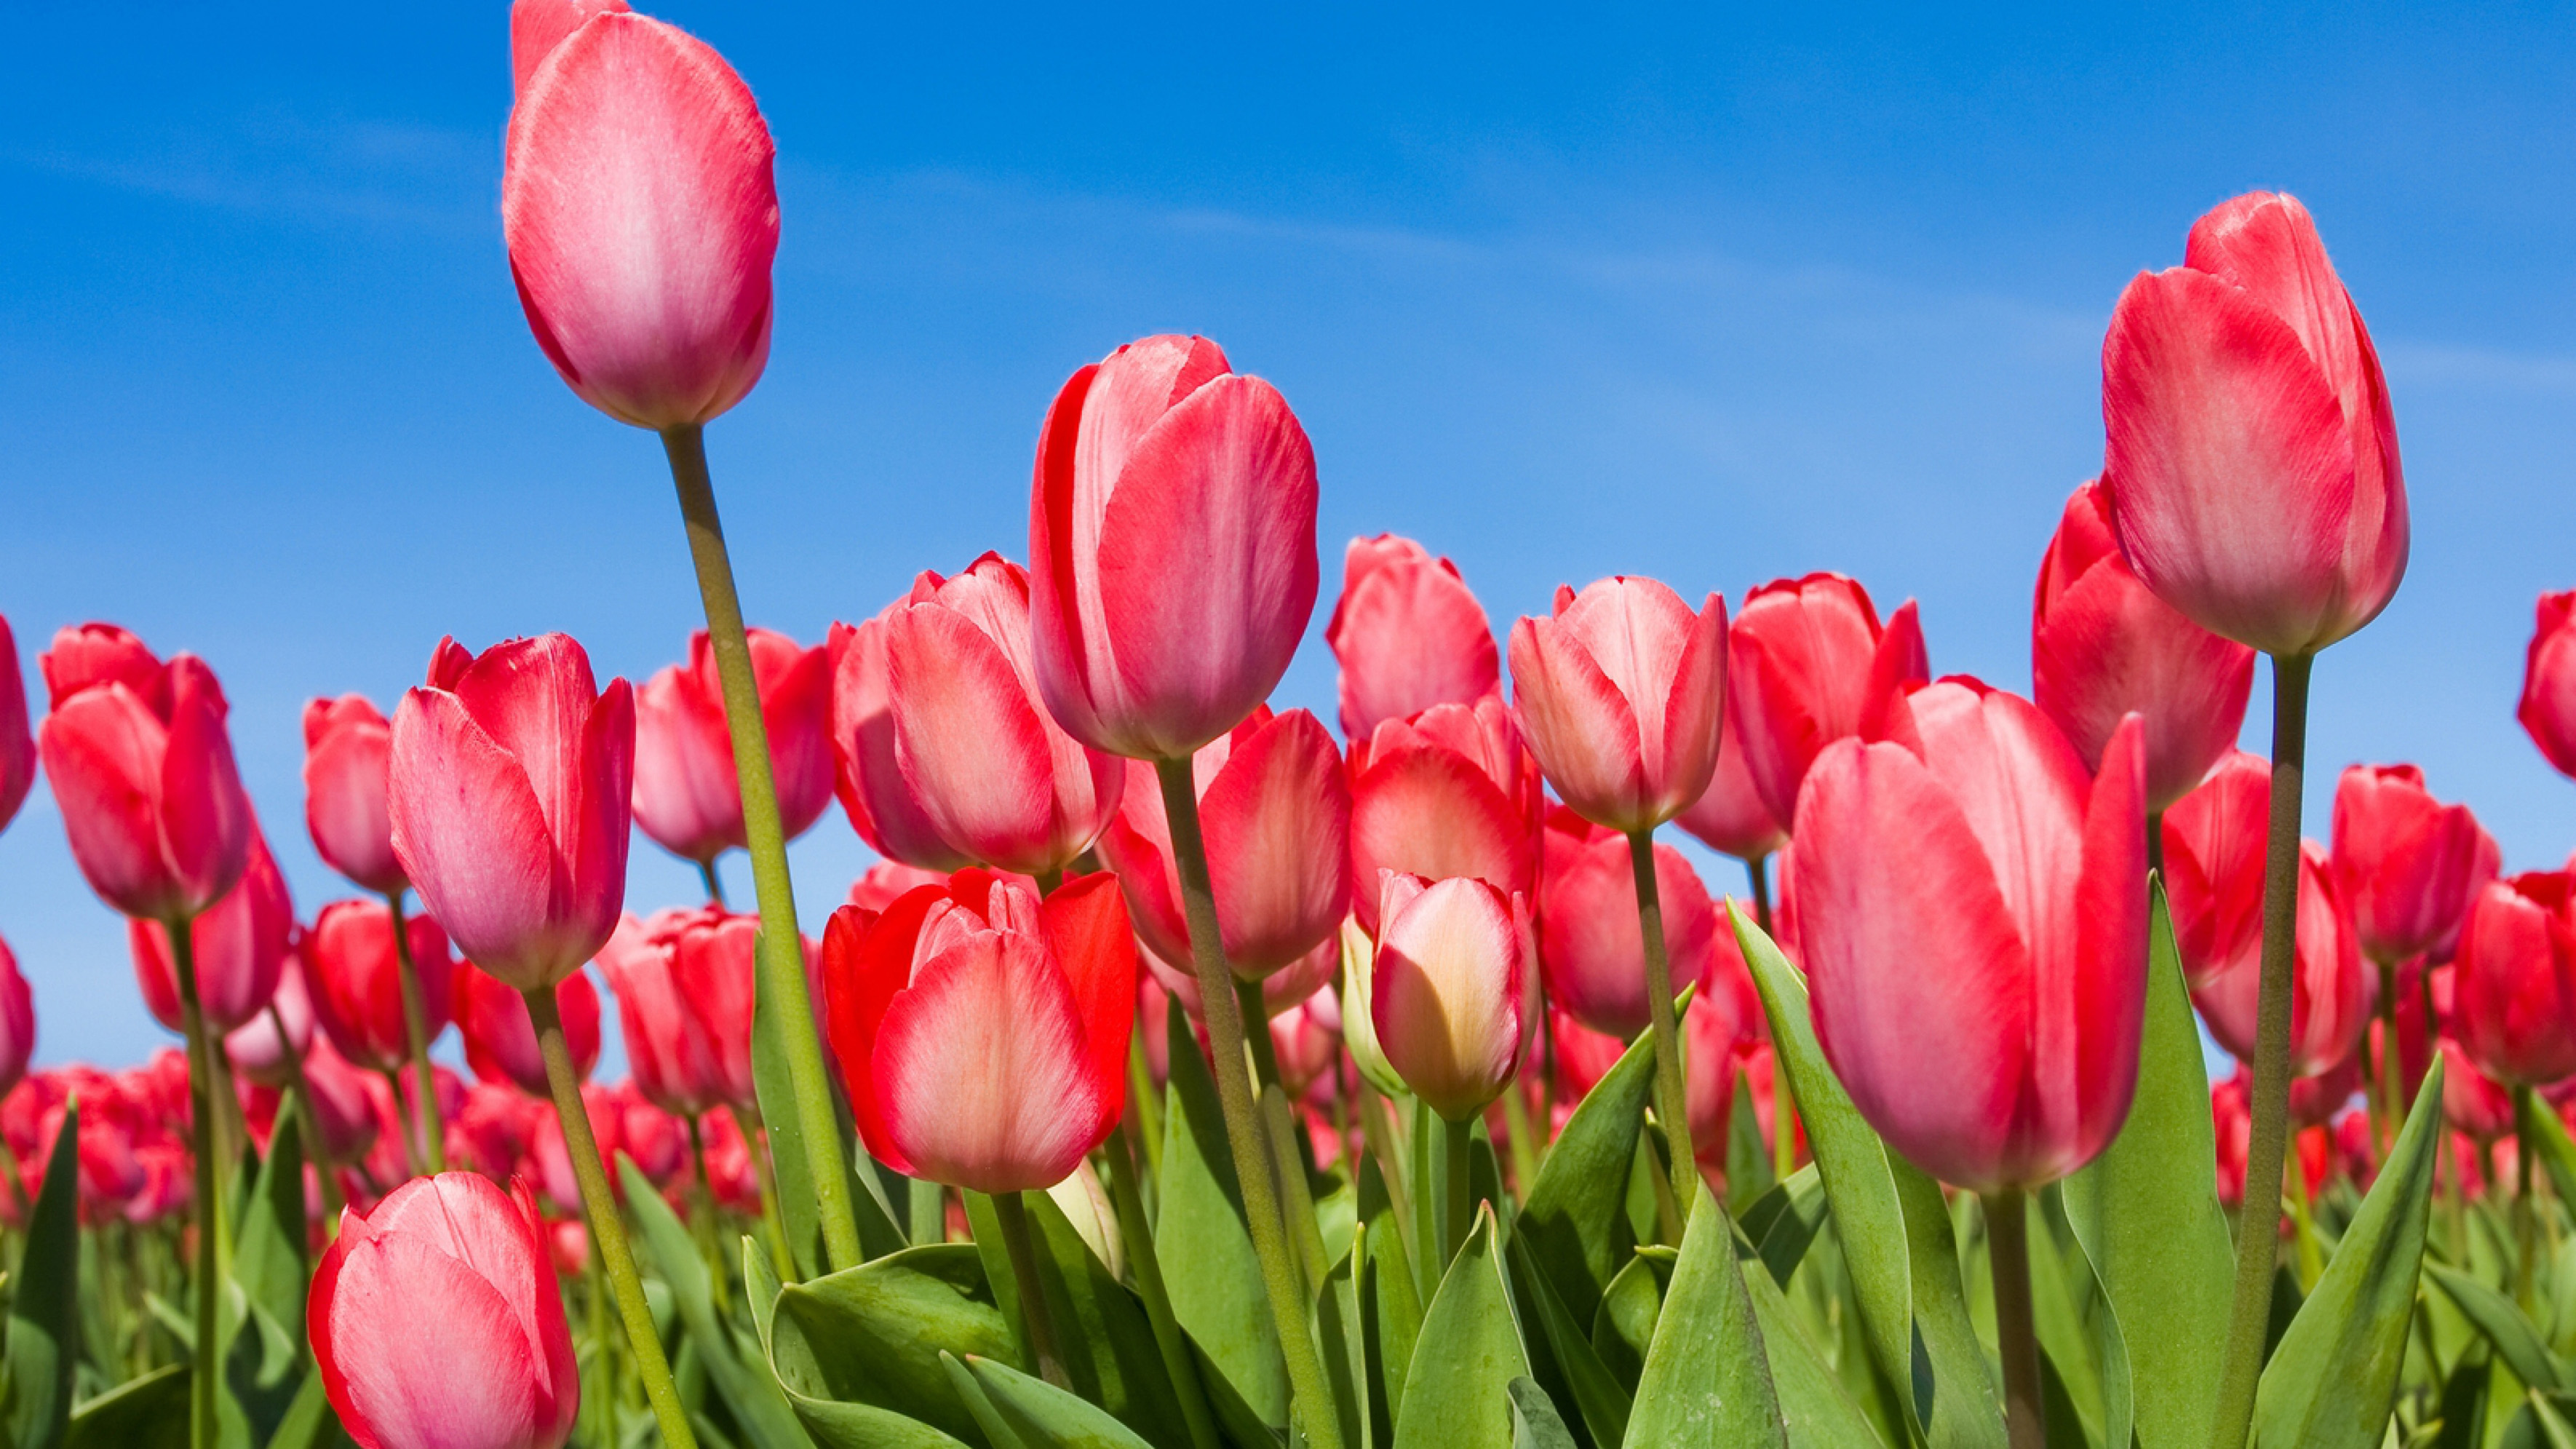 Nature Wallpaper Desktop Spring Flower With Red Tulips HD